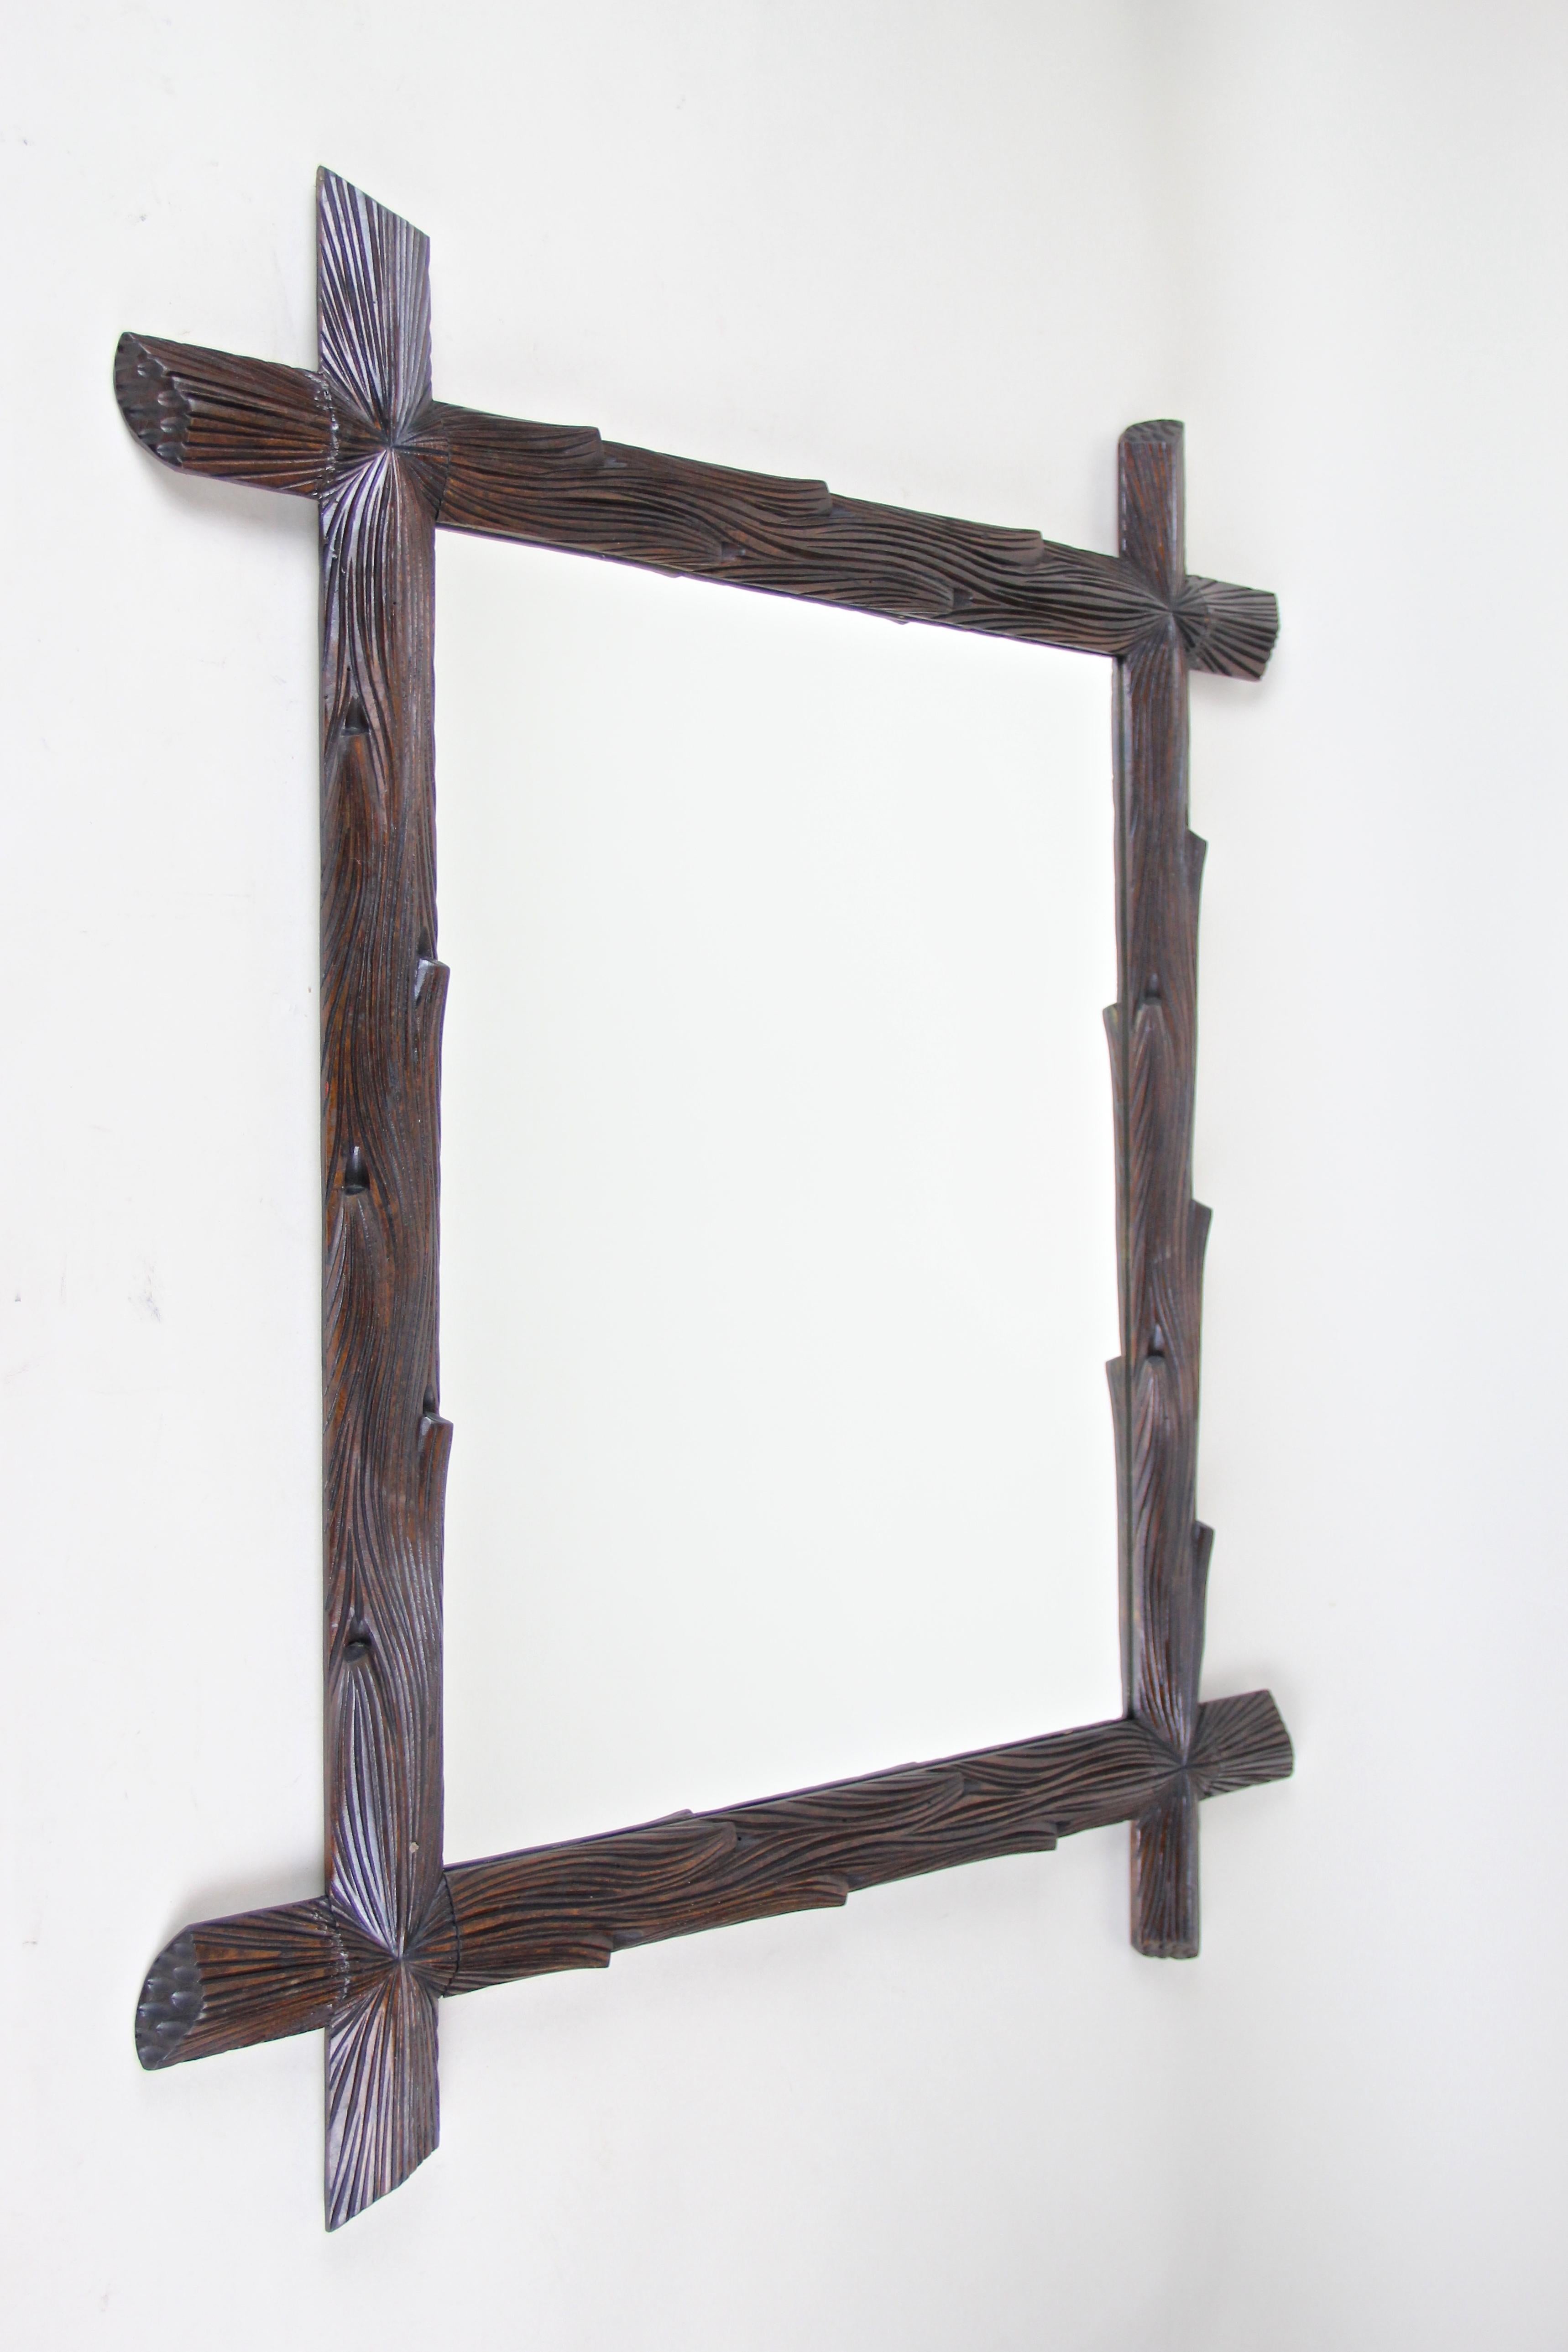 Mesmerizing Black Forest wall mirror from Austria circa 1890. This rustic wooden mirror has been elaborately made out of basswood in the manner of tree branches and impresses with its unique radial carved corners. The beautiful darkbrown nearly